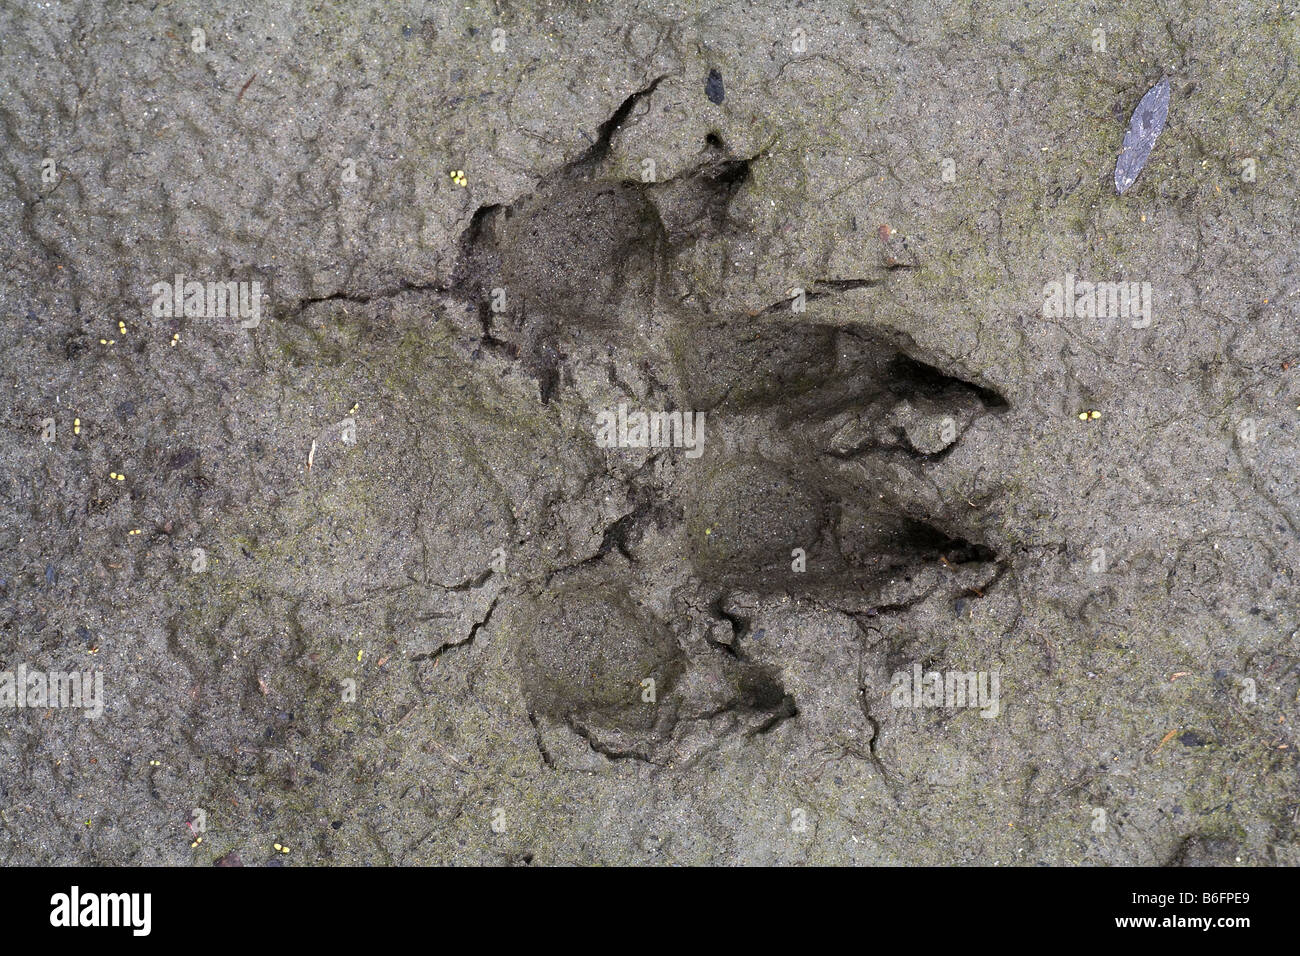 Foot print of a Canadian Wolf (Canis lupus canadensis), mud, Big Salmon River, Yukon Territory, Canada, North America Stock Photo